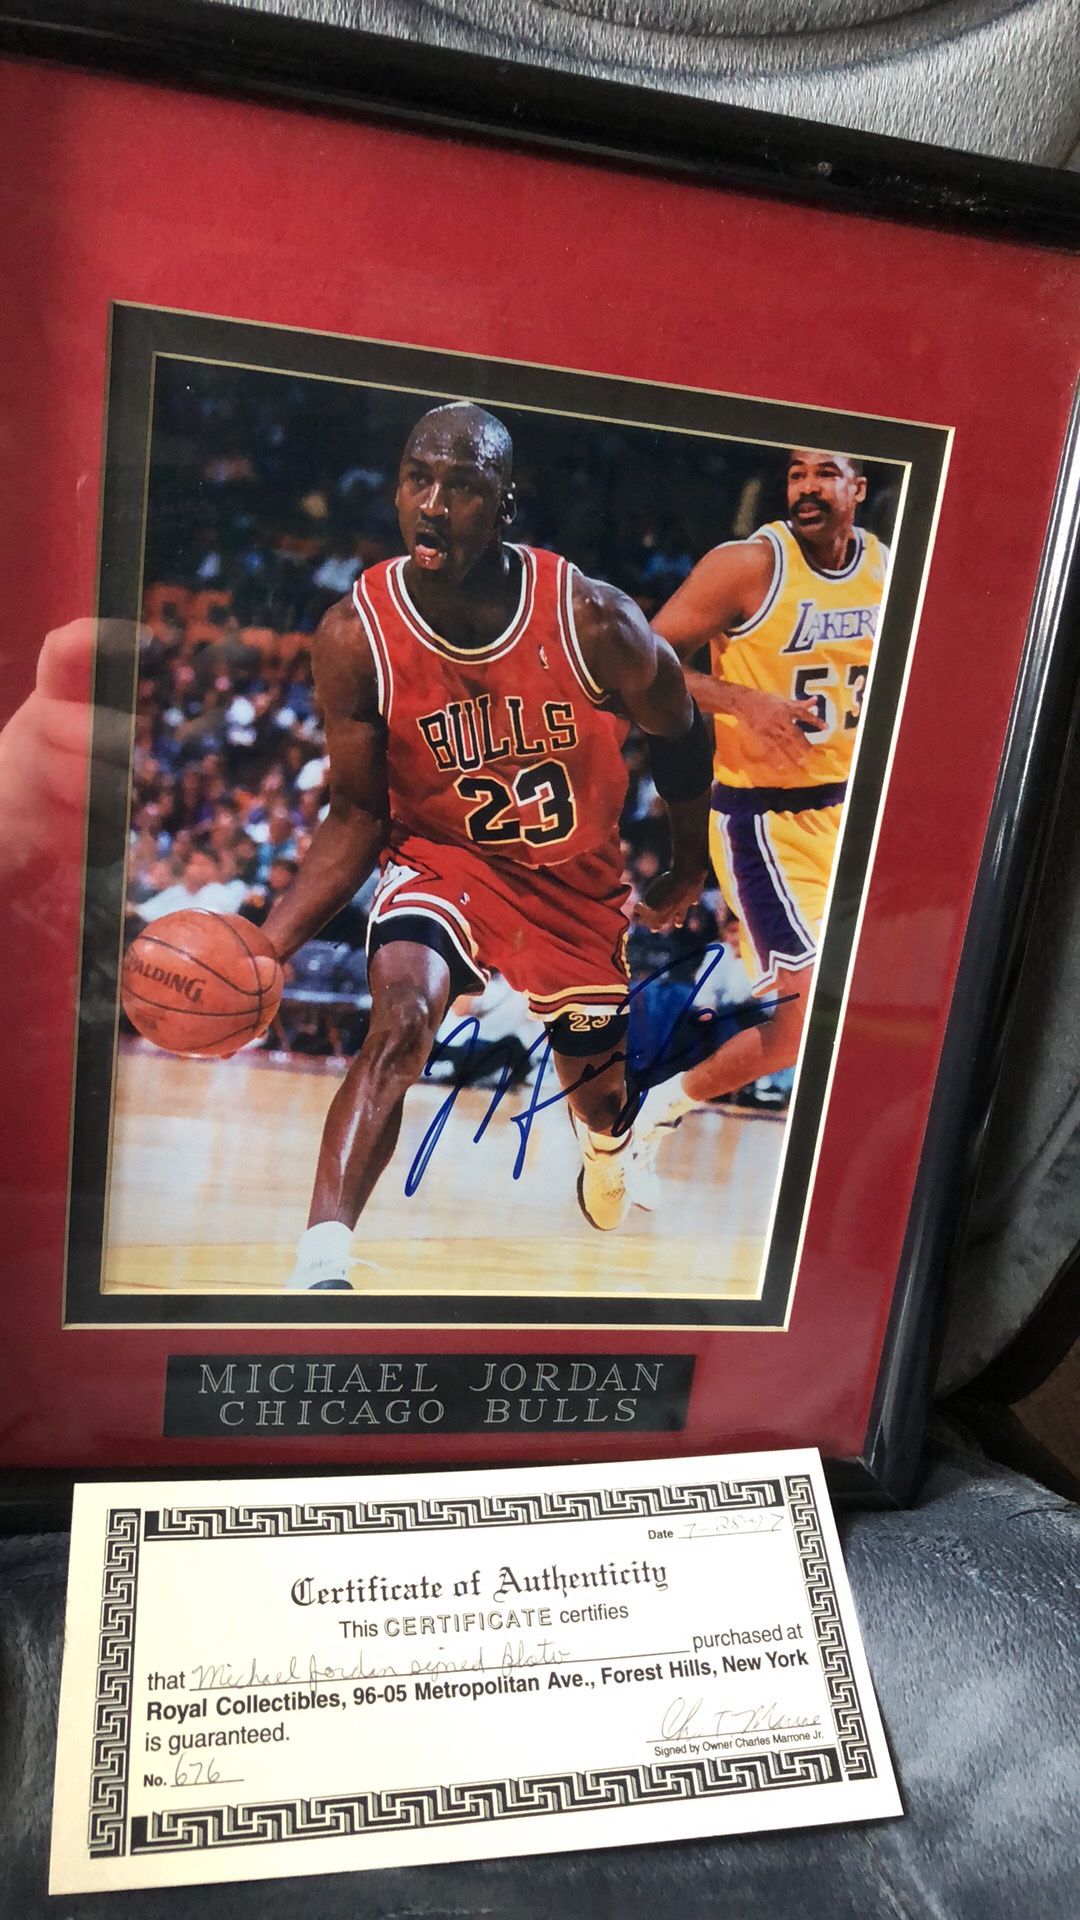 Autographed Michael Jordan color photo framed and matted with coa